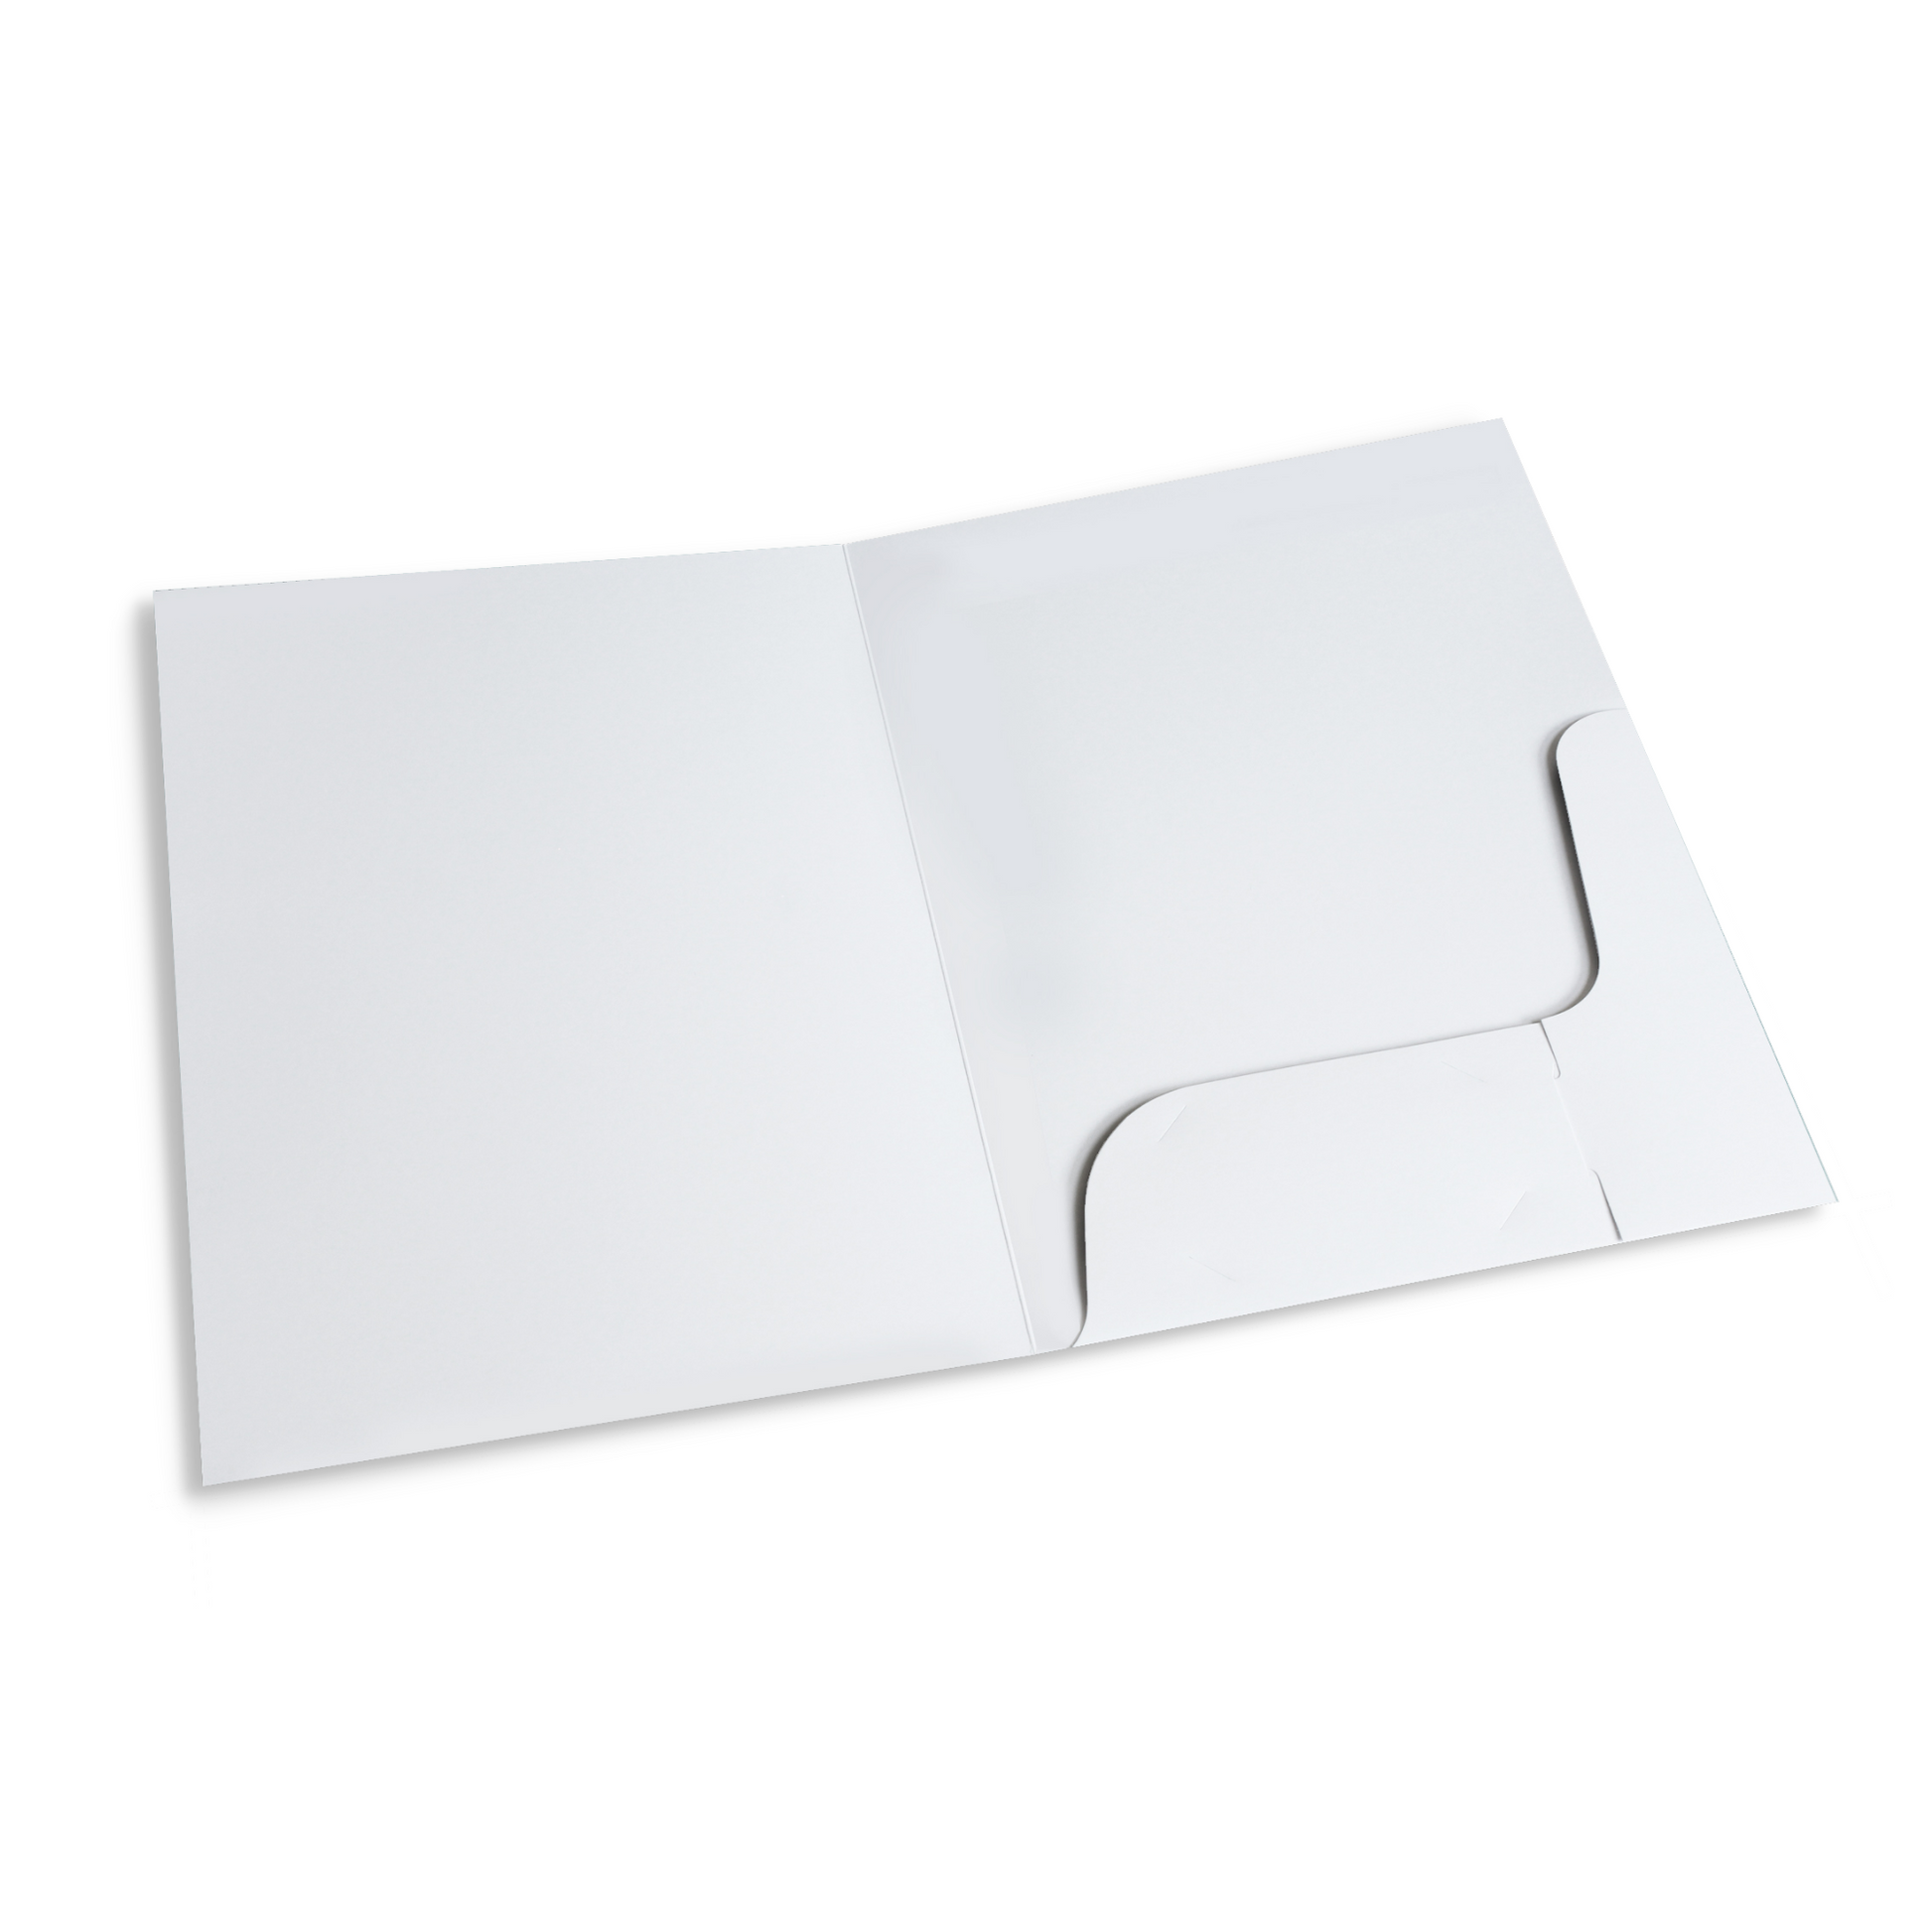 Open white gloss 250gsm card presentation folder lying flat, featuring a dedicated business card holder on the inside pocket. The clean, professional design is ideal for business or academic presentations.